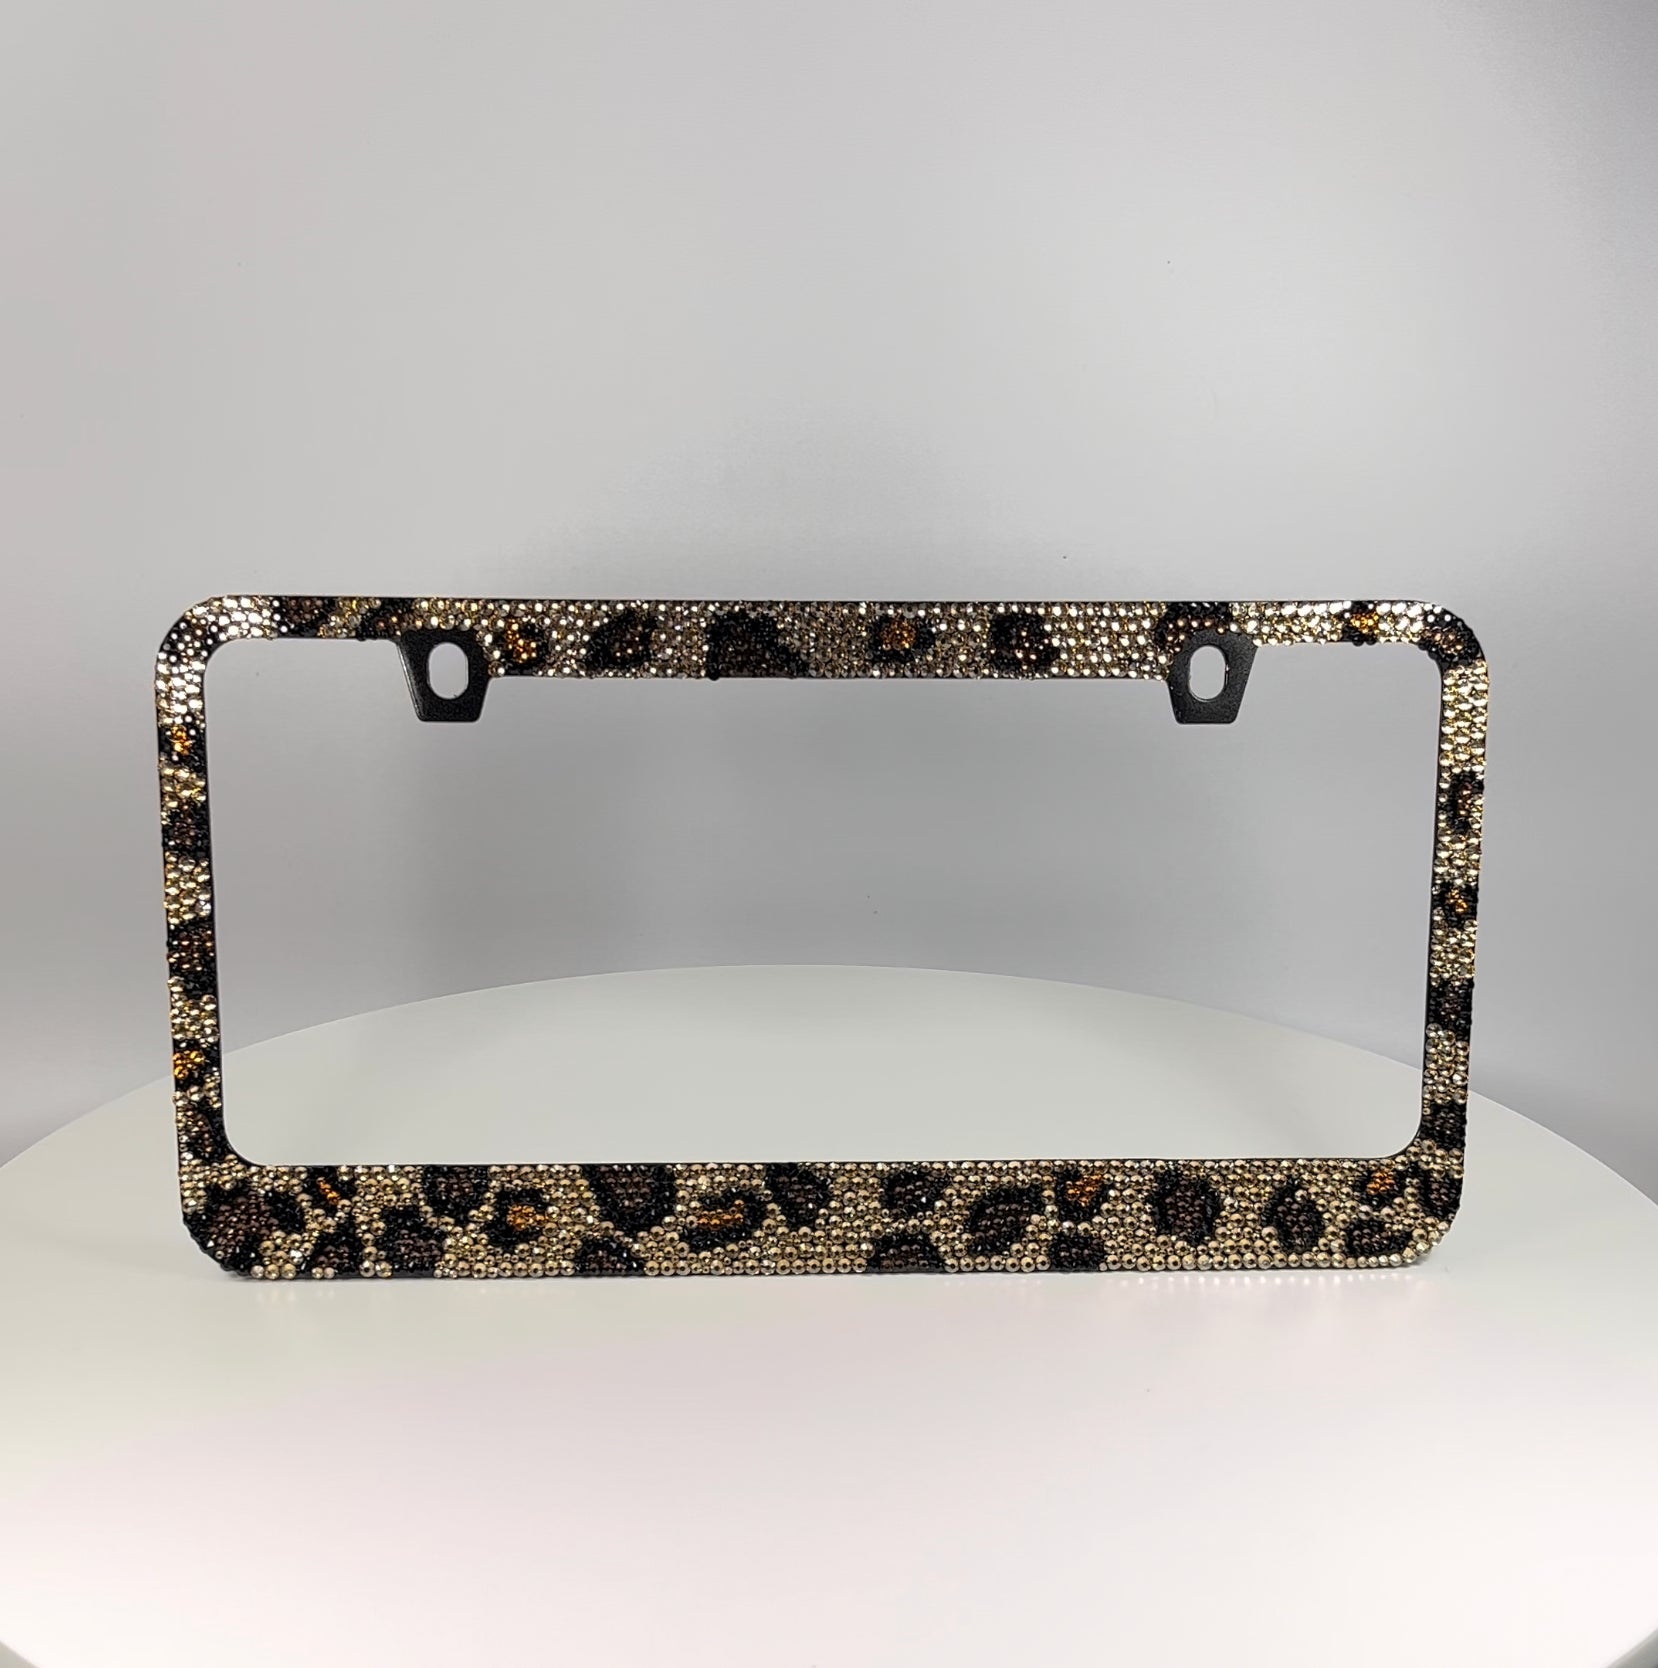 Leopard Print Swarovski License Plate Frame, Crystallized Crystal Bling Plate Frames by ICY Couture.